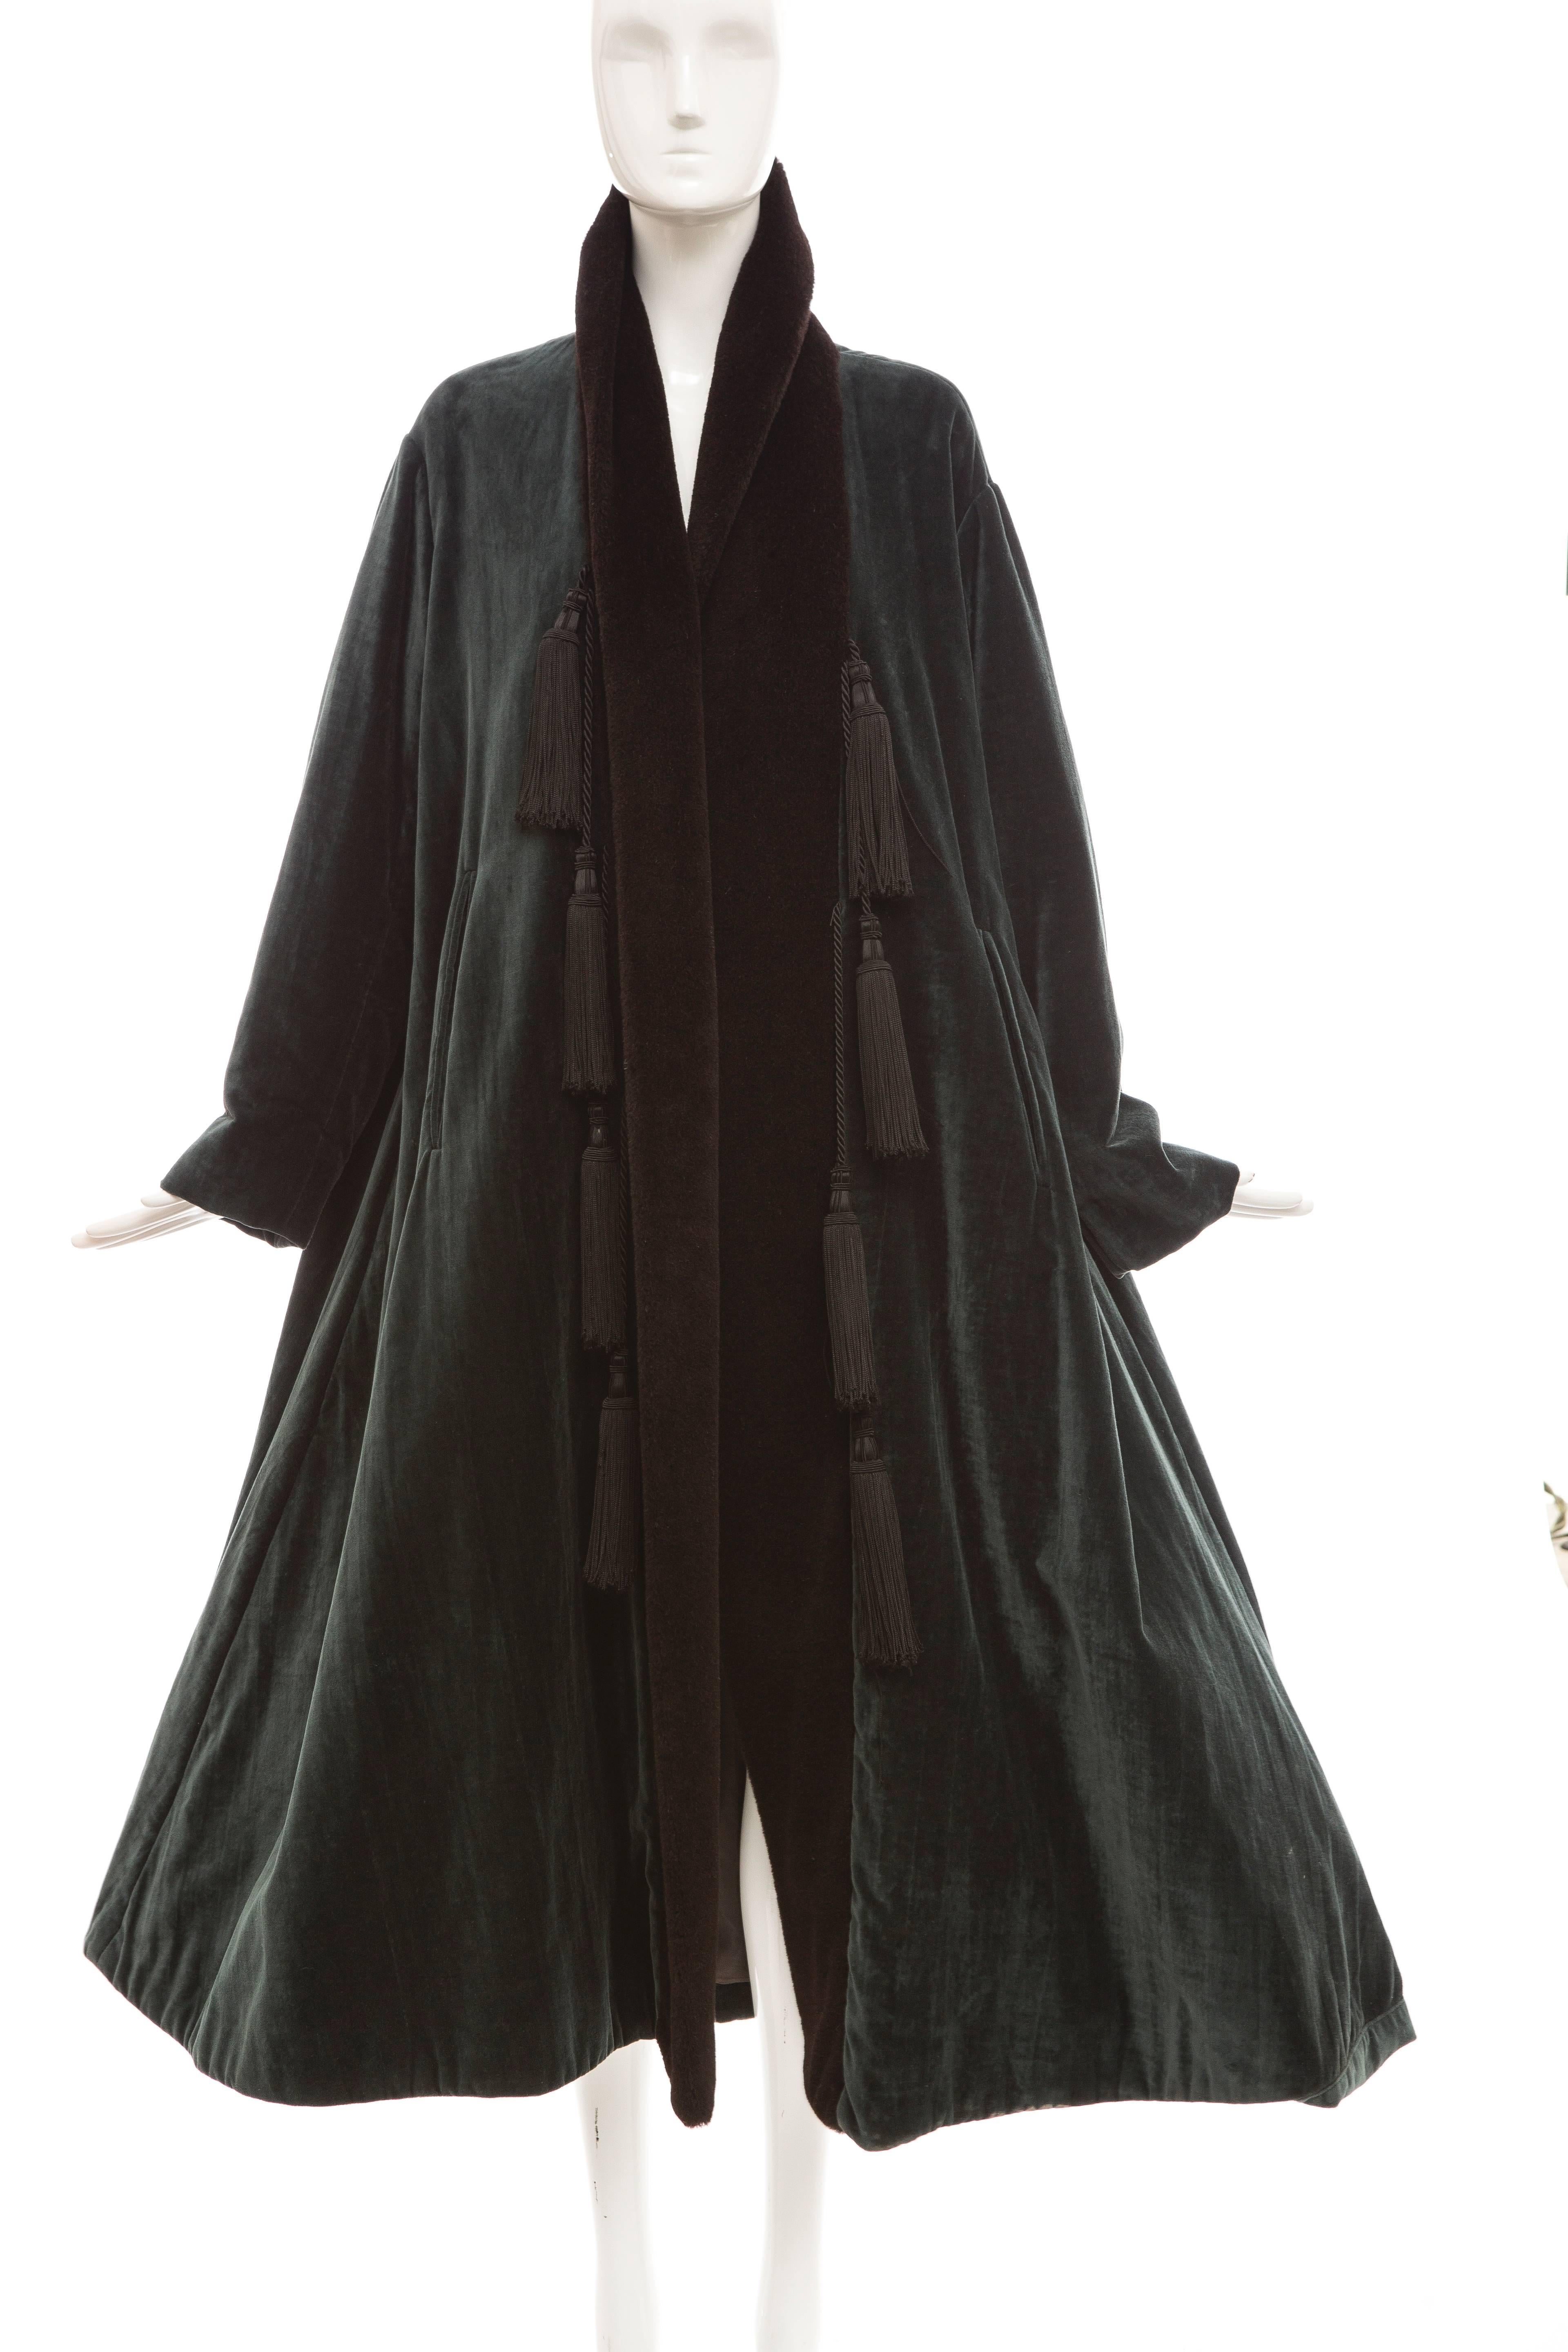 Romeo Gigli, Fall 1994, cotton velvet swing coat with poly fleece lapel, embellished tassels, two front pockets and fully lined in silk.

US. 6 - 8